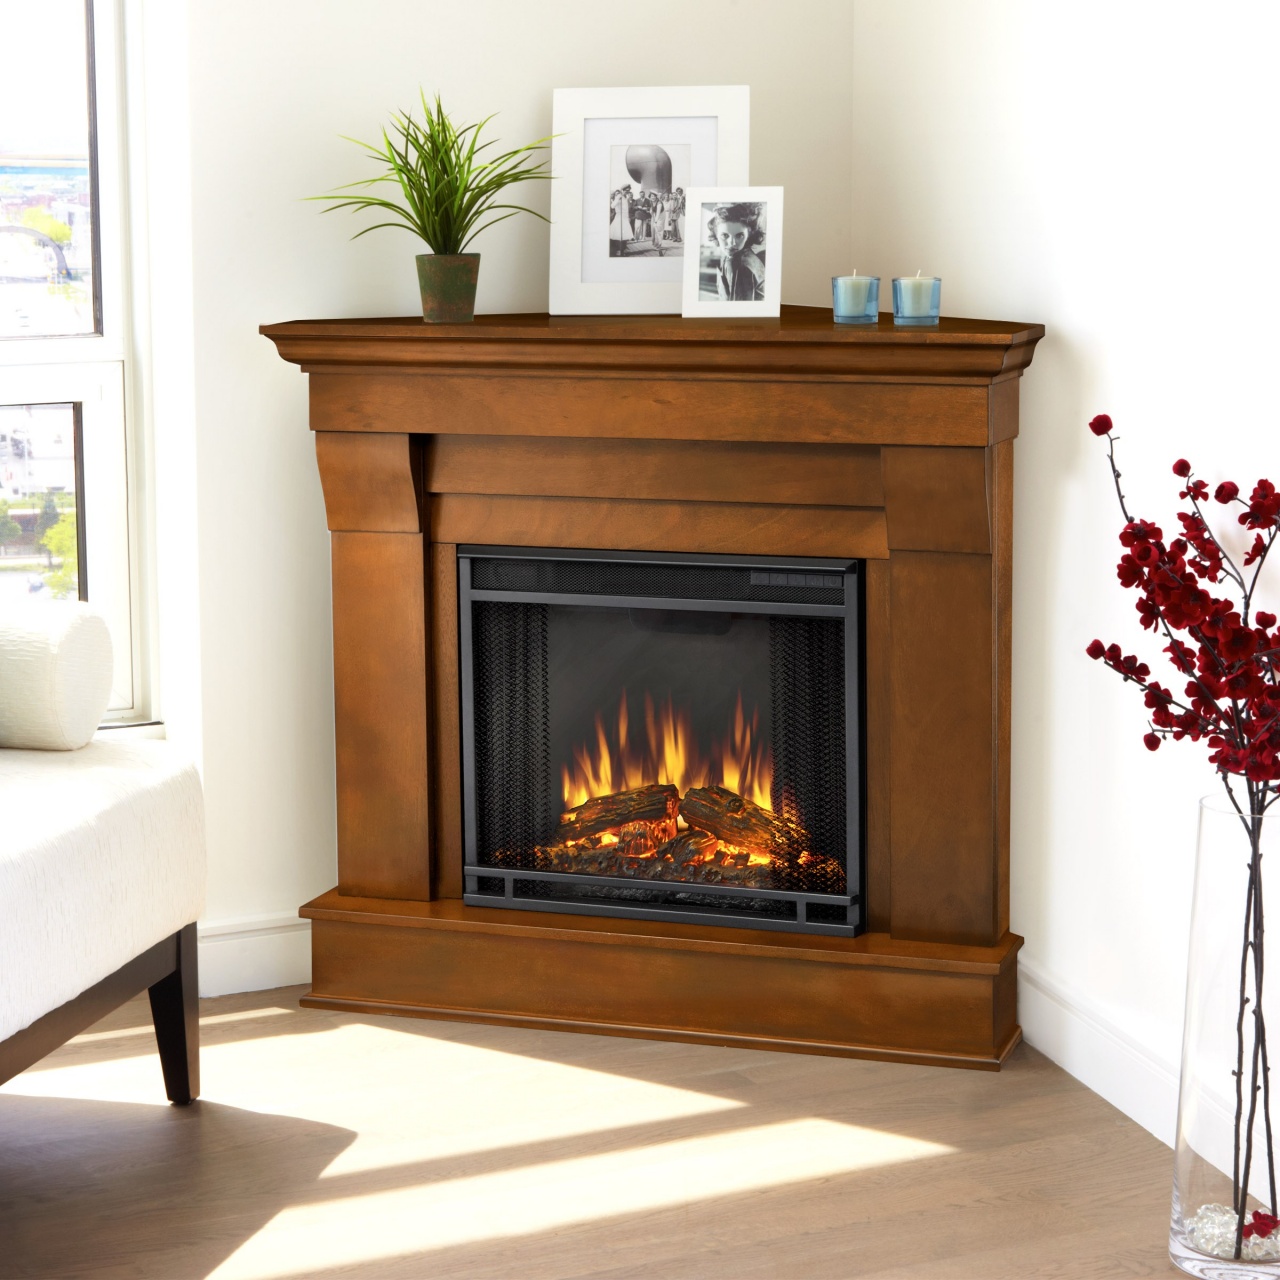 Lowes Fireplace Unique Wood Burning Fireplace without Chimney – Fireplace Ideas